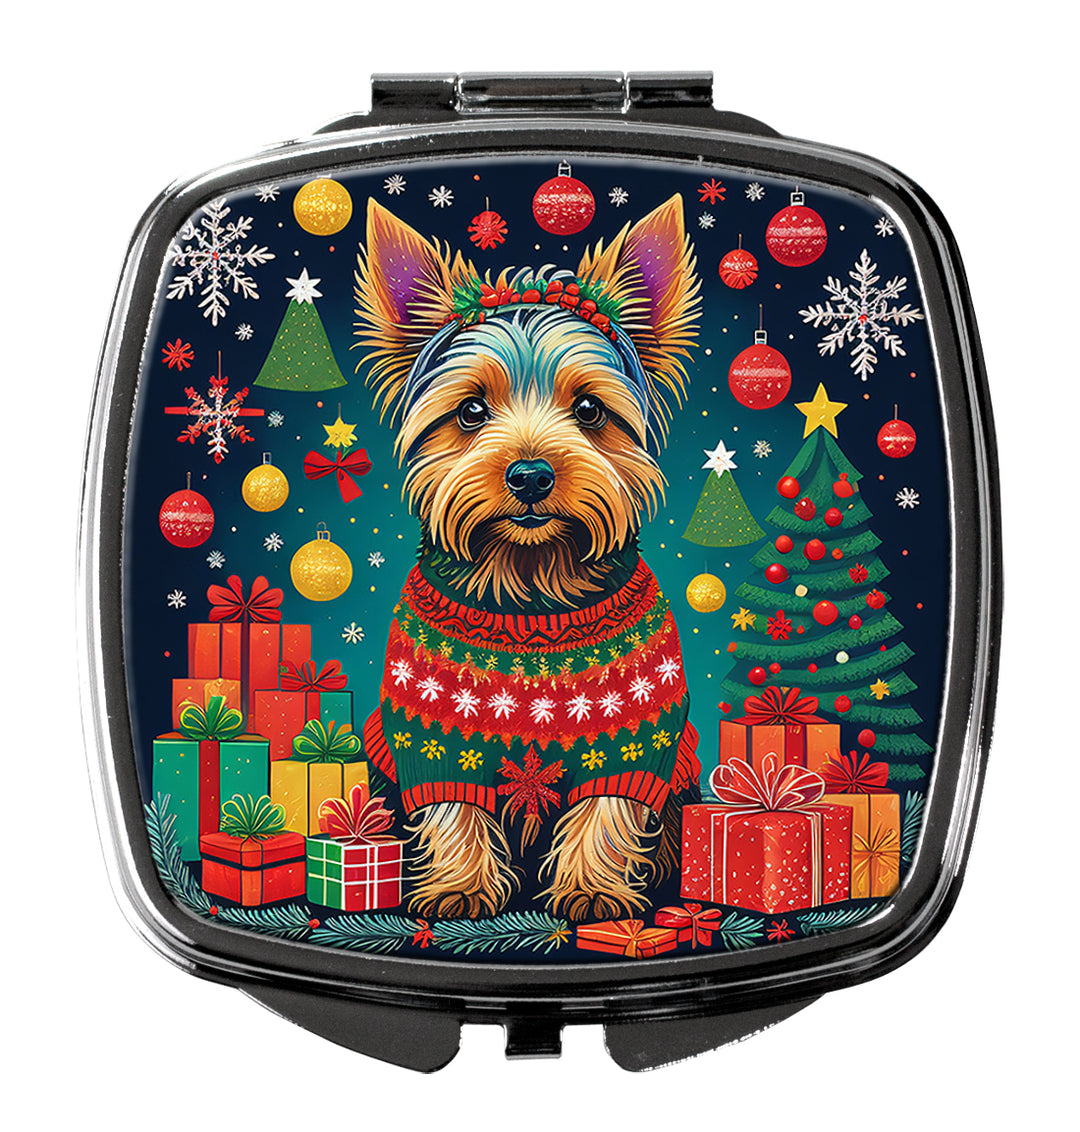 Yorkie Yorkshire Terrier Christmas Compact Mirror Image 9